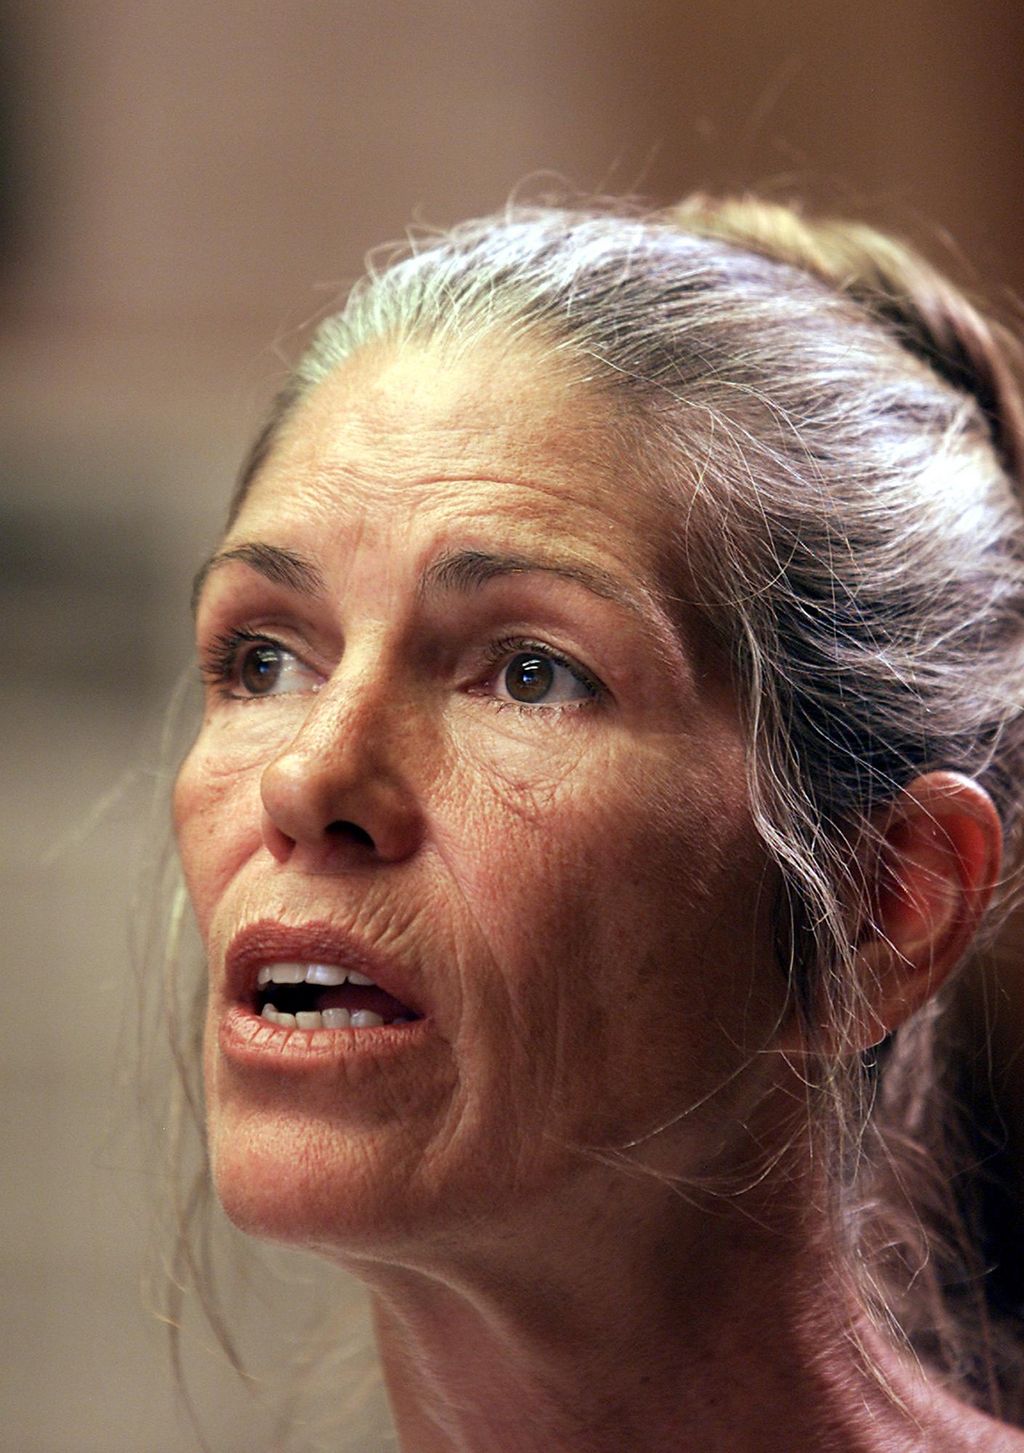 Leslie Van Houten, a former follower of Charles Manson, during a parole hearing in June 2002 